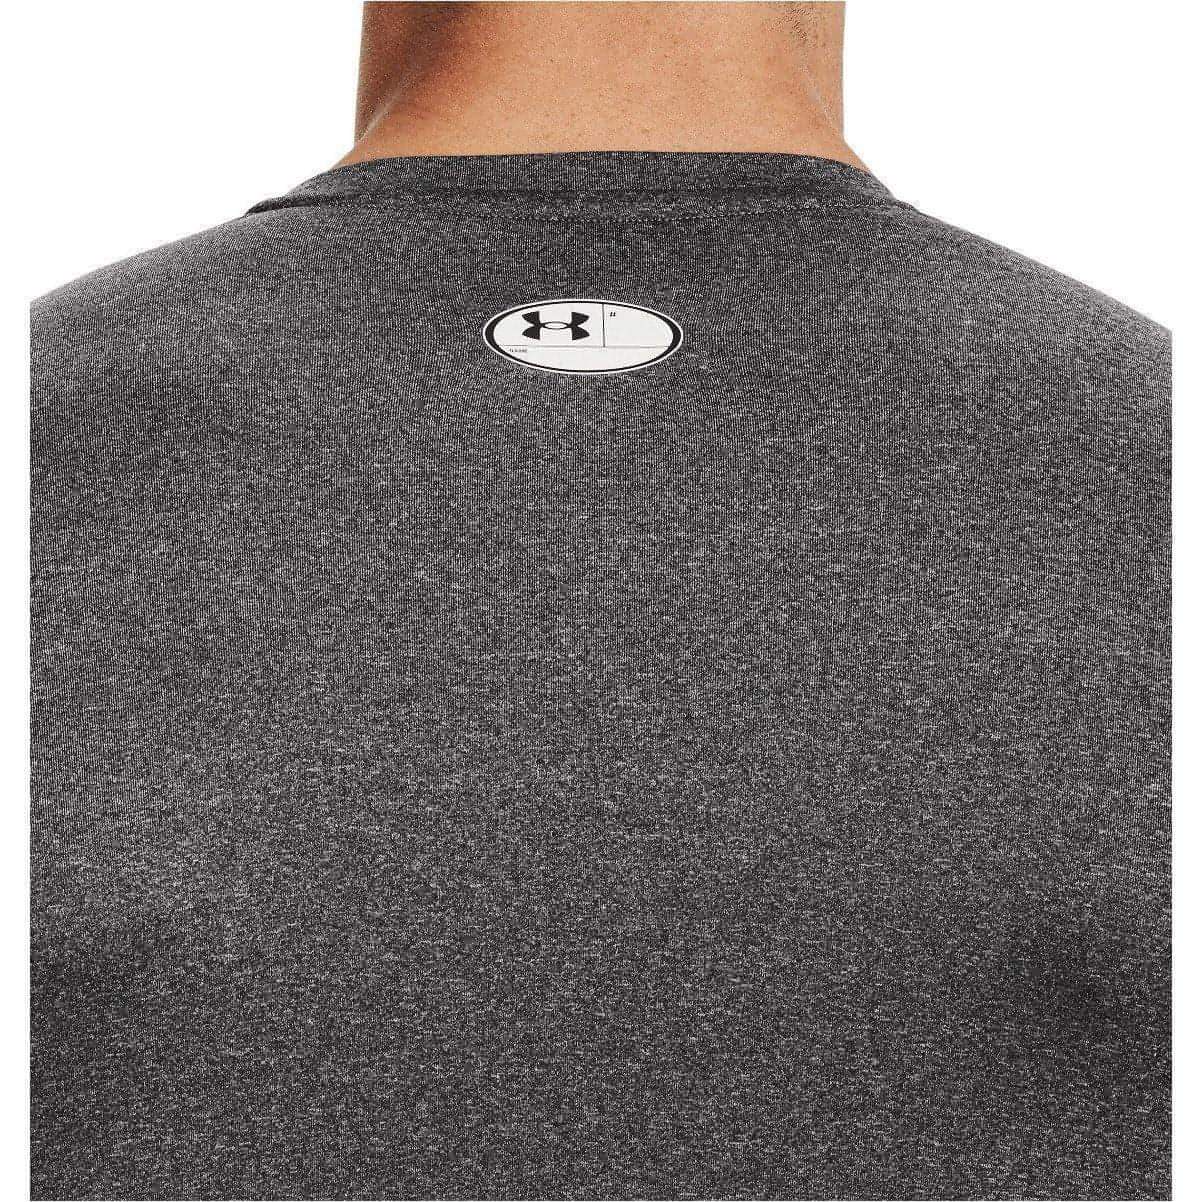 Under Armour Heatgear Armour Long Sleeve Mens Compression Top - Grey - Start Fitness